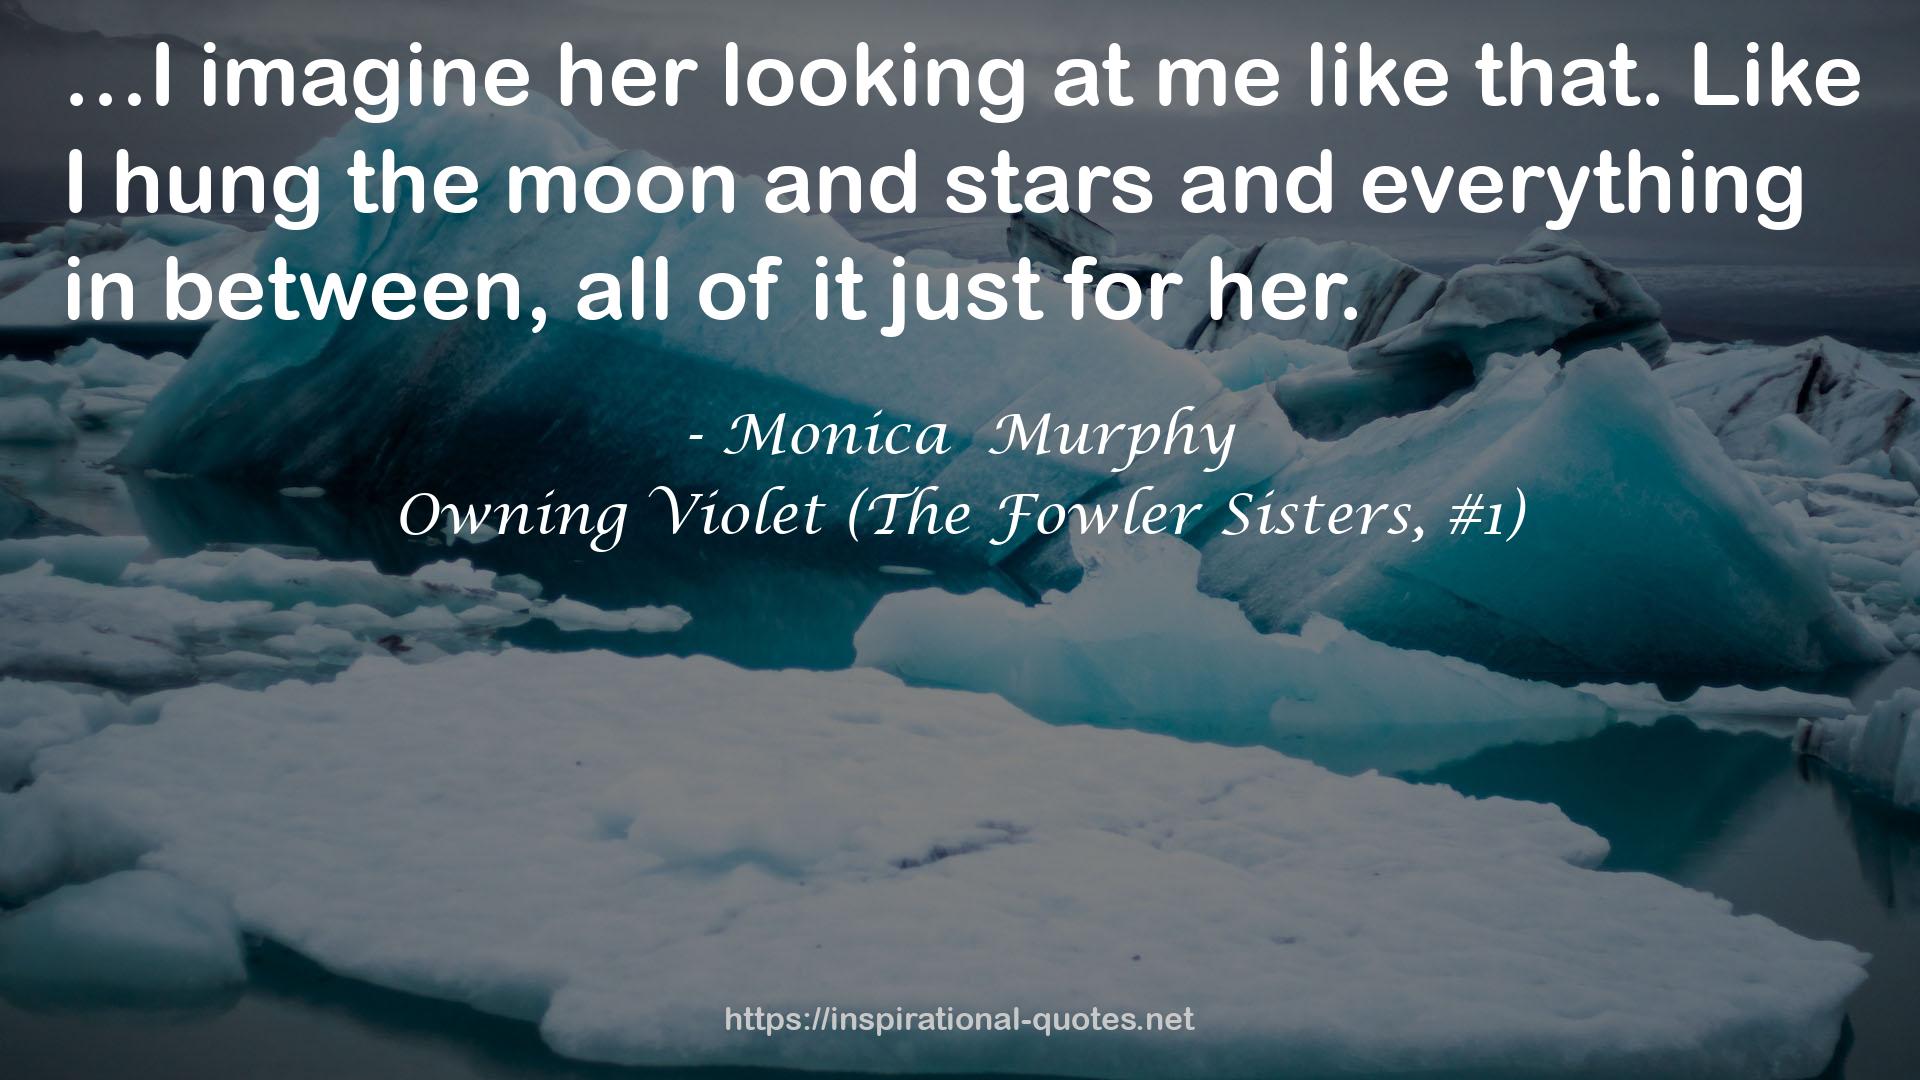 Owning Violet (The Fowler Sisters, #1) QUOTES